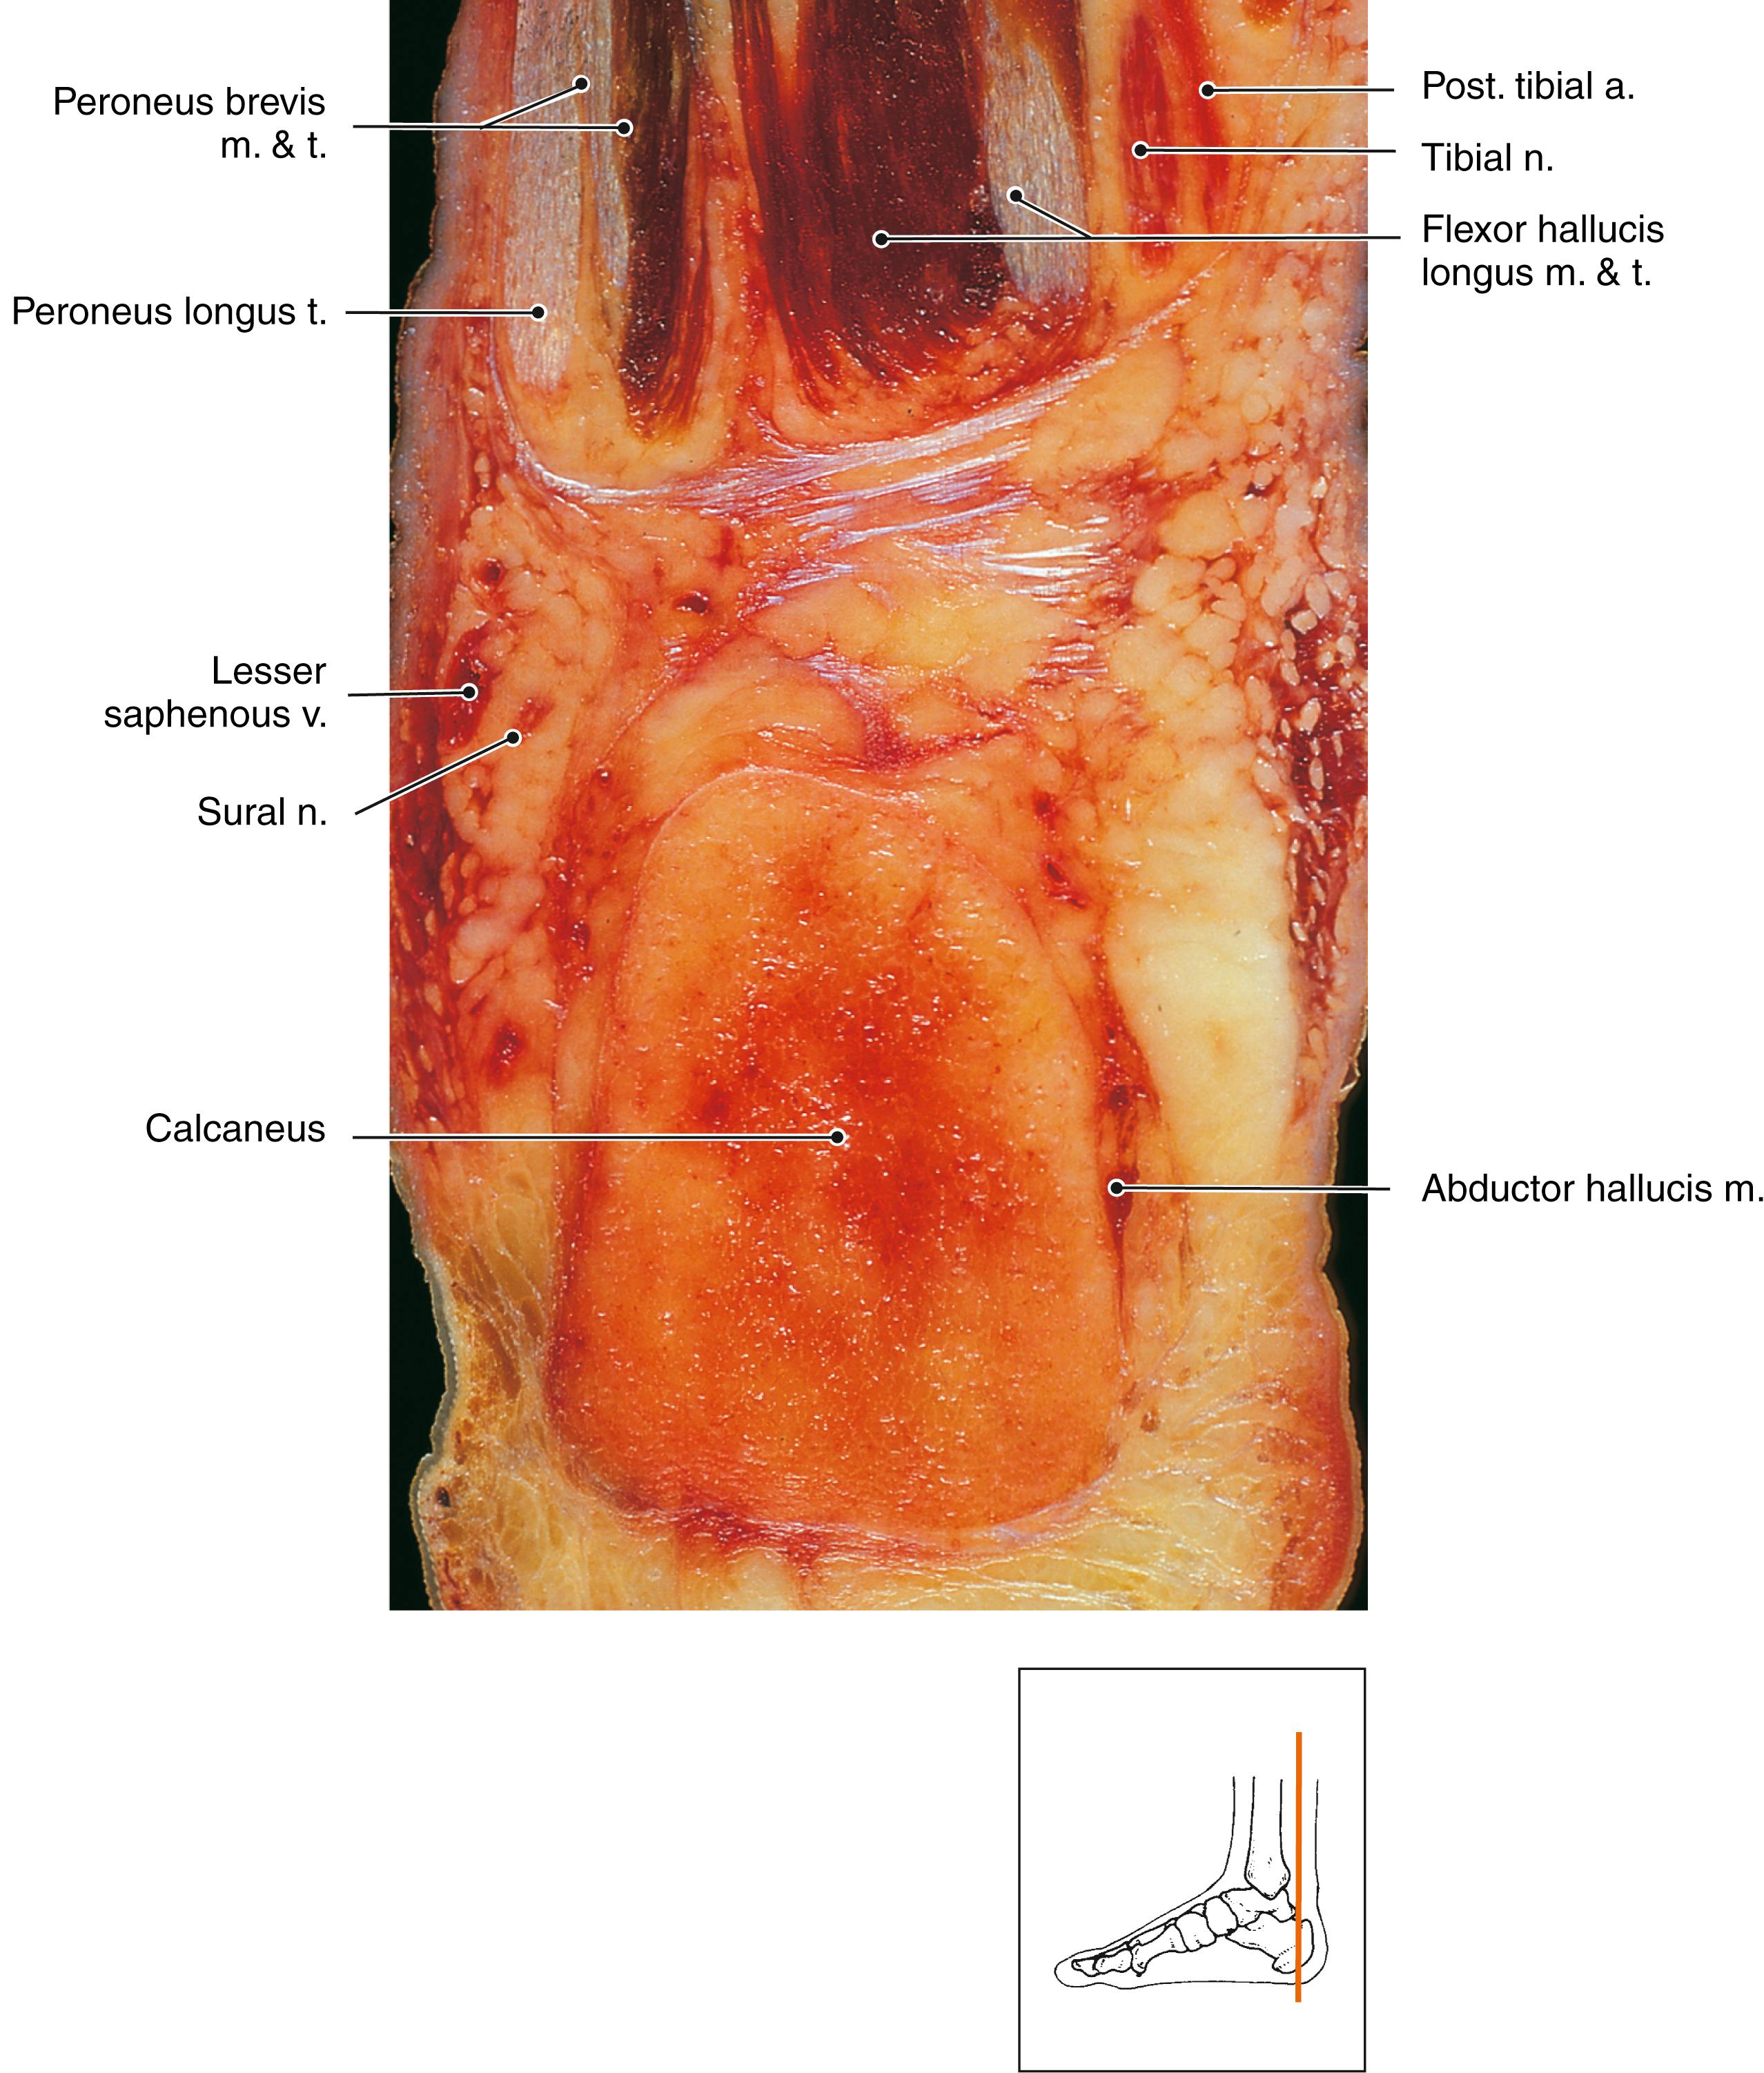 FIG. 188.6, Anatomy of the peroneus longus and brevis muscles and related structures.